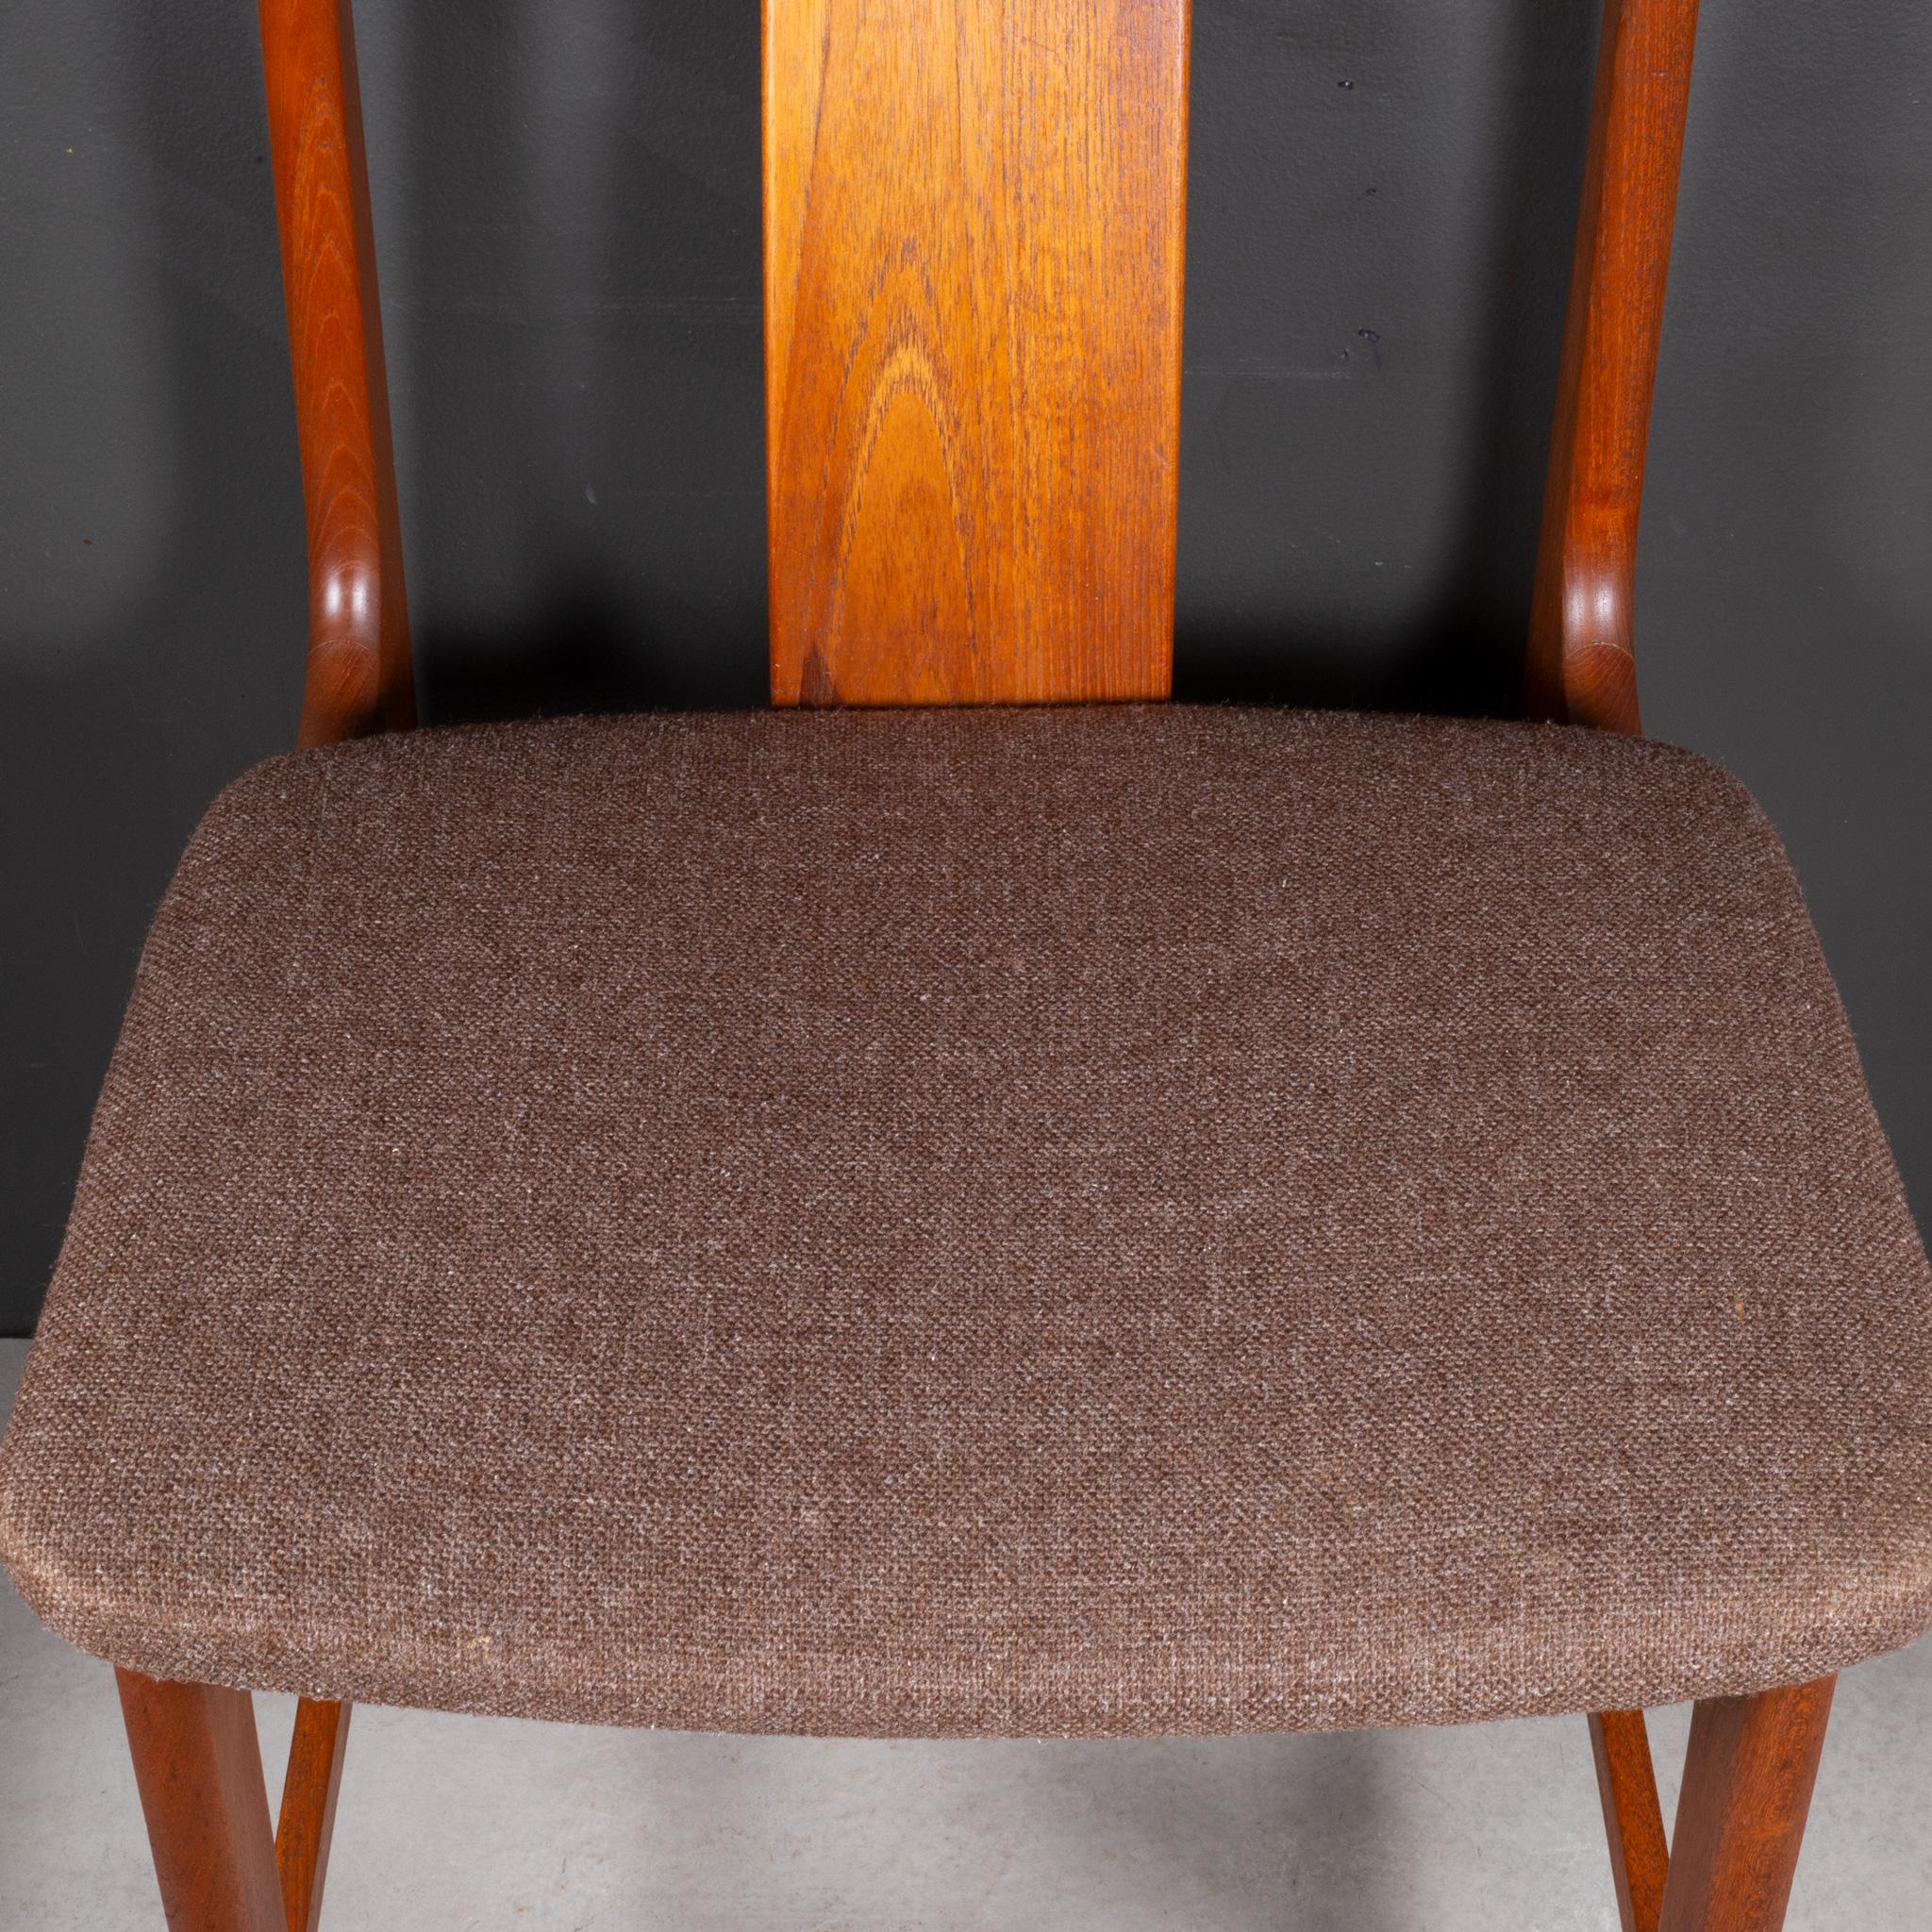 Midcentury Japanese Sculpted Teak Dining Chairs C.1960 For Sale 9